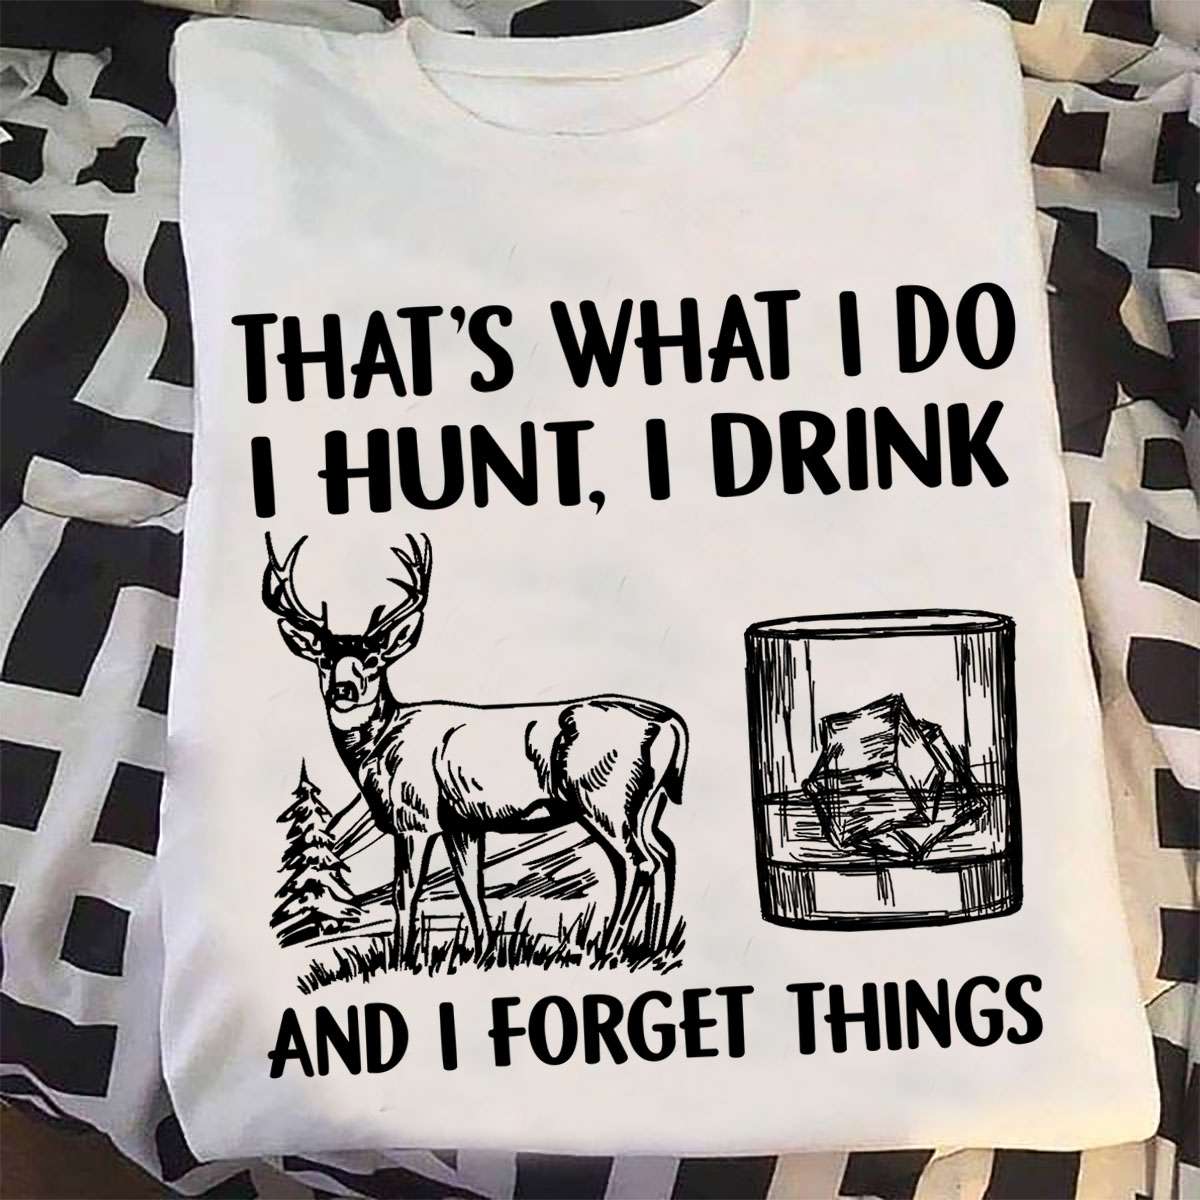 That's what I do I hunt, I drink and I forget things - Hunting and drinking